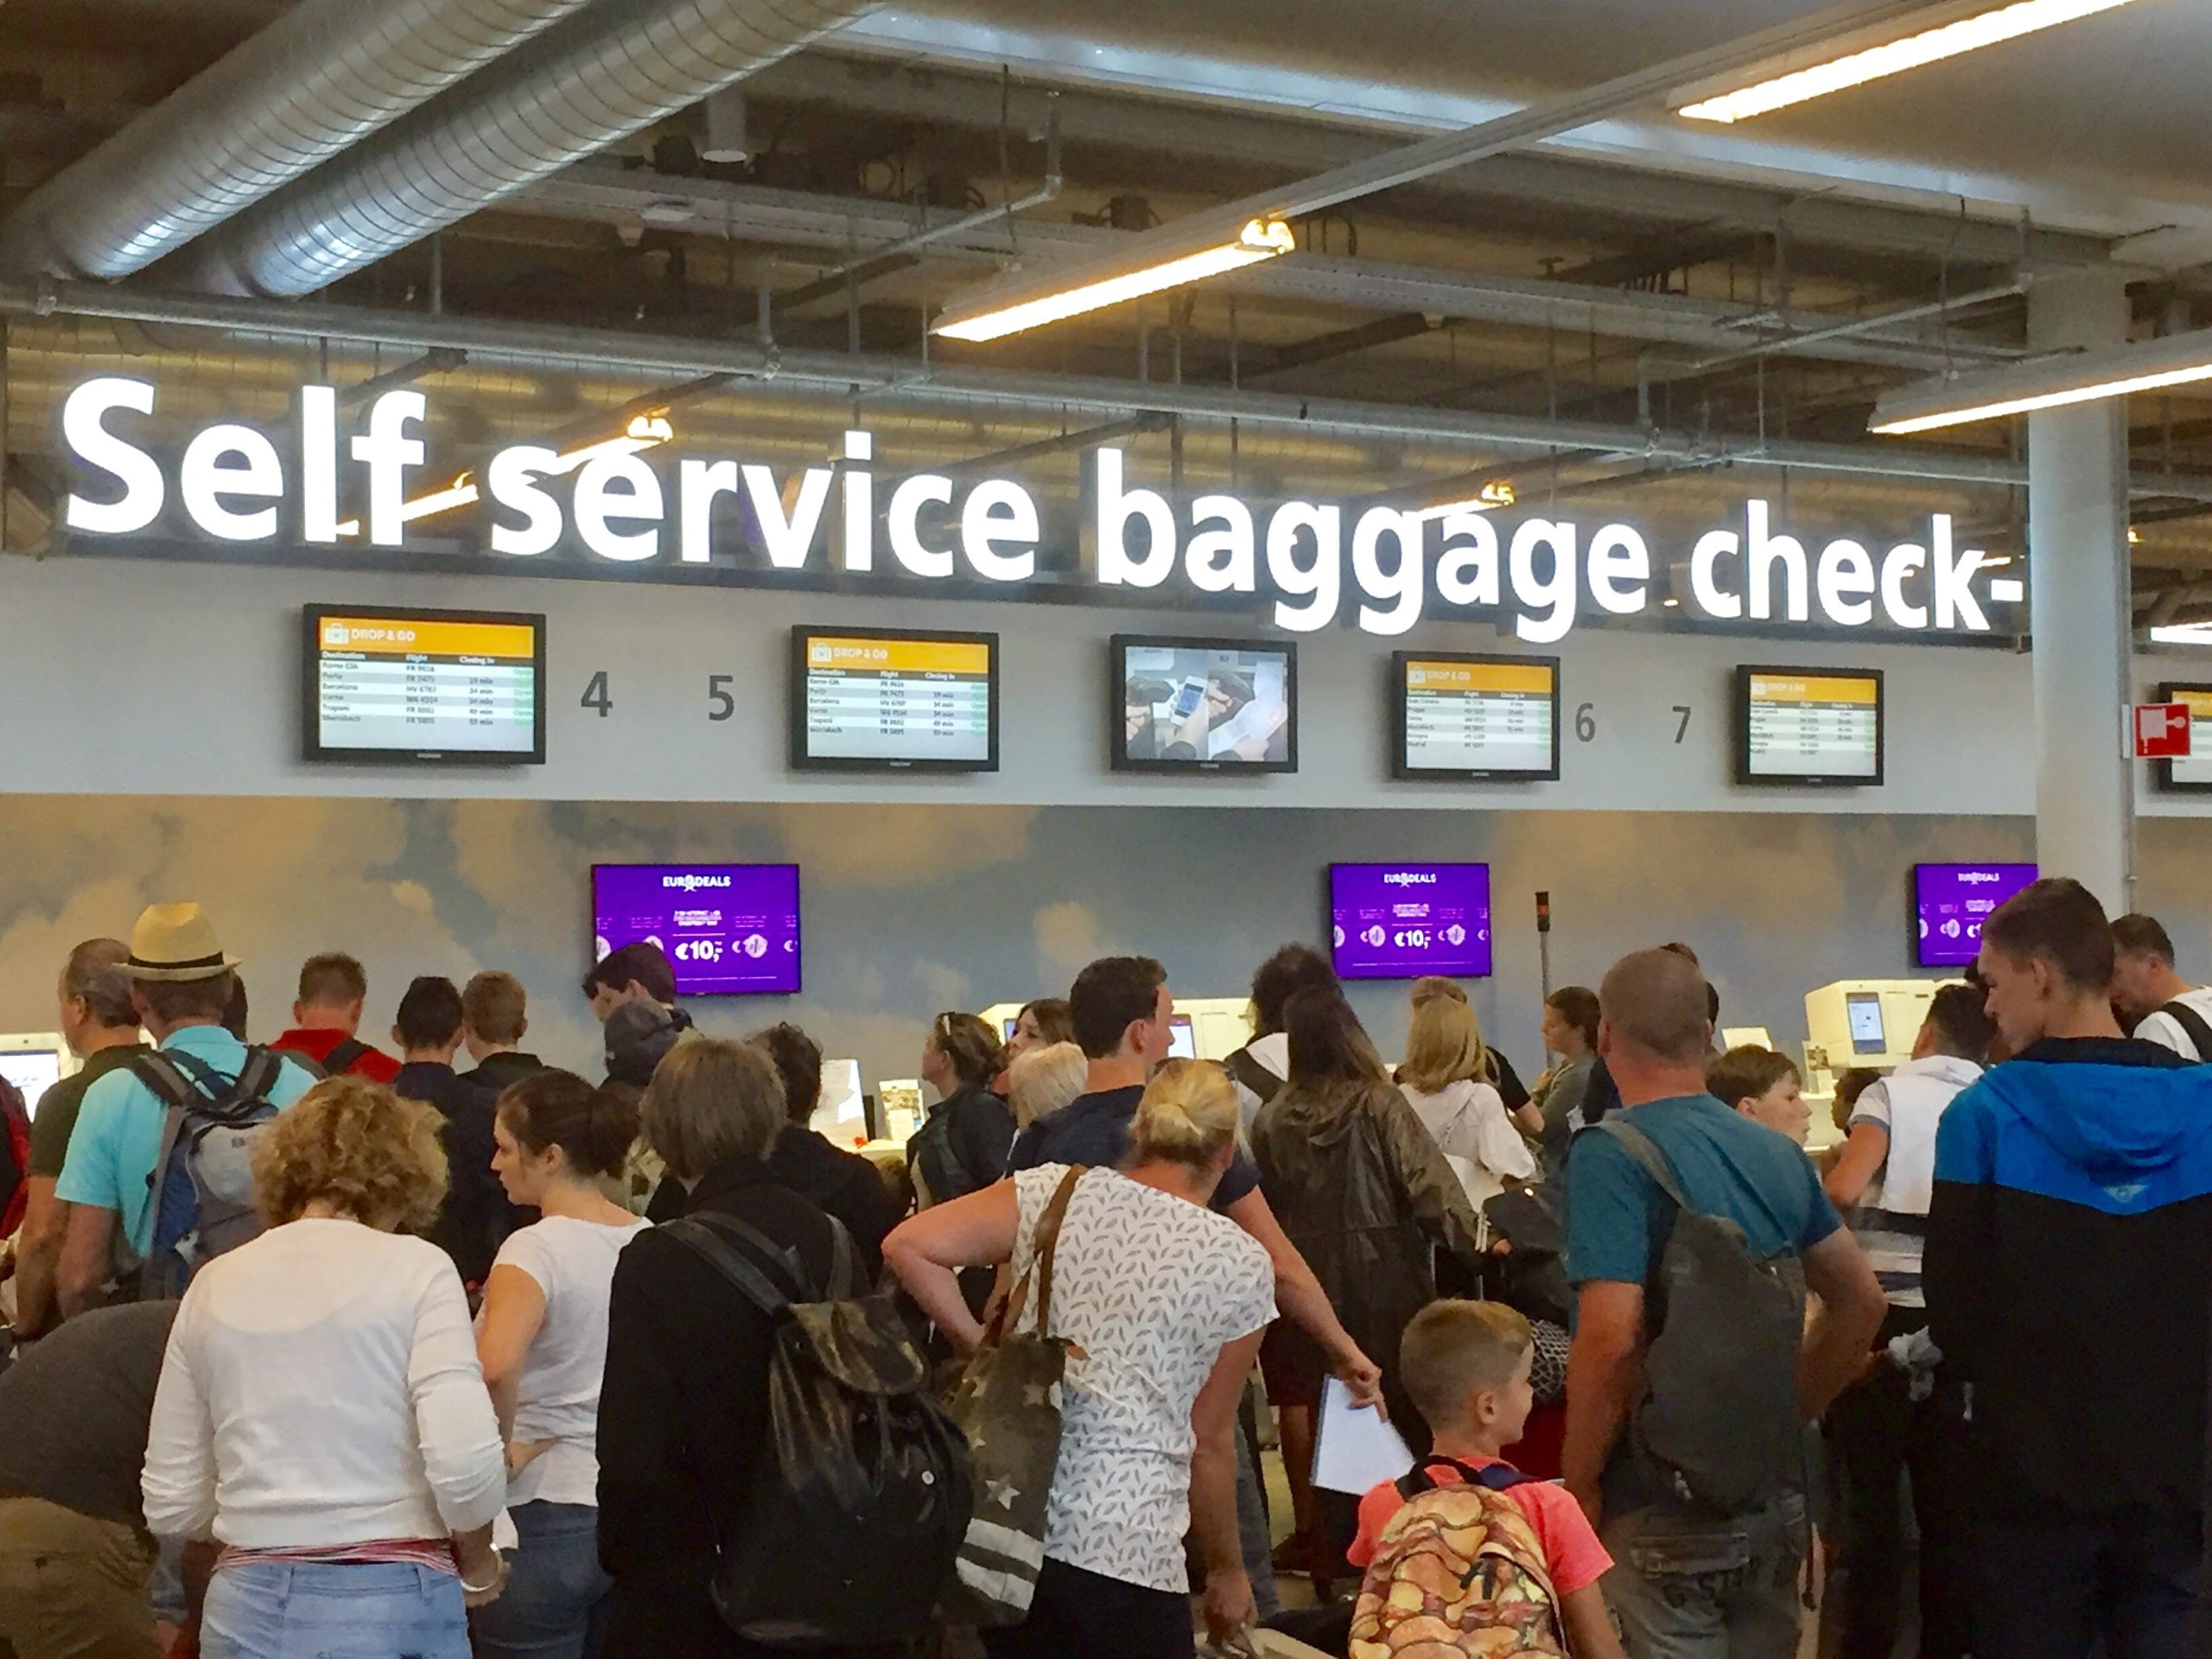 Passenger peaks at Eindhoven Airport: a year of unprecedented growth